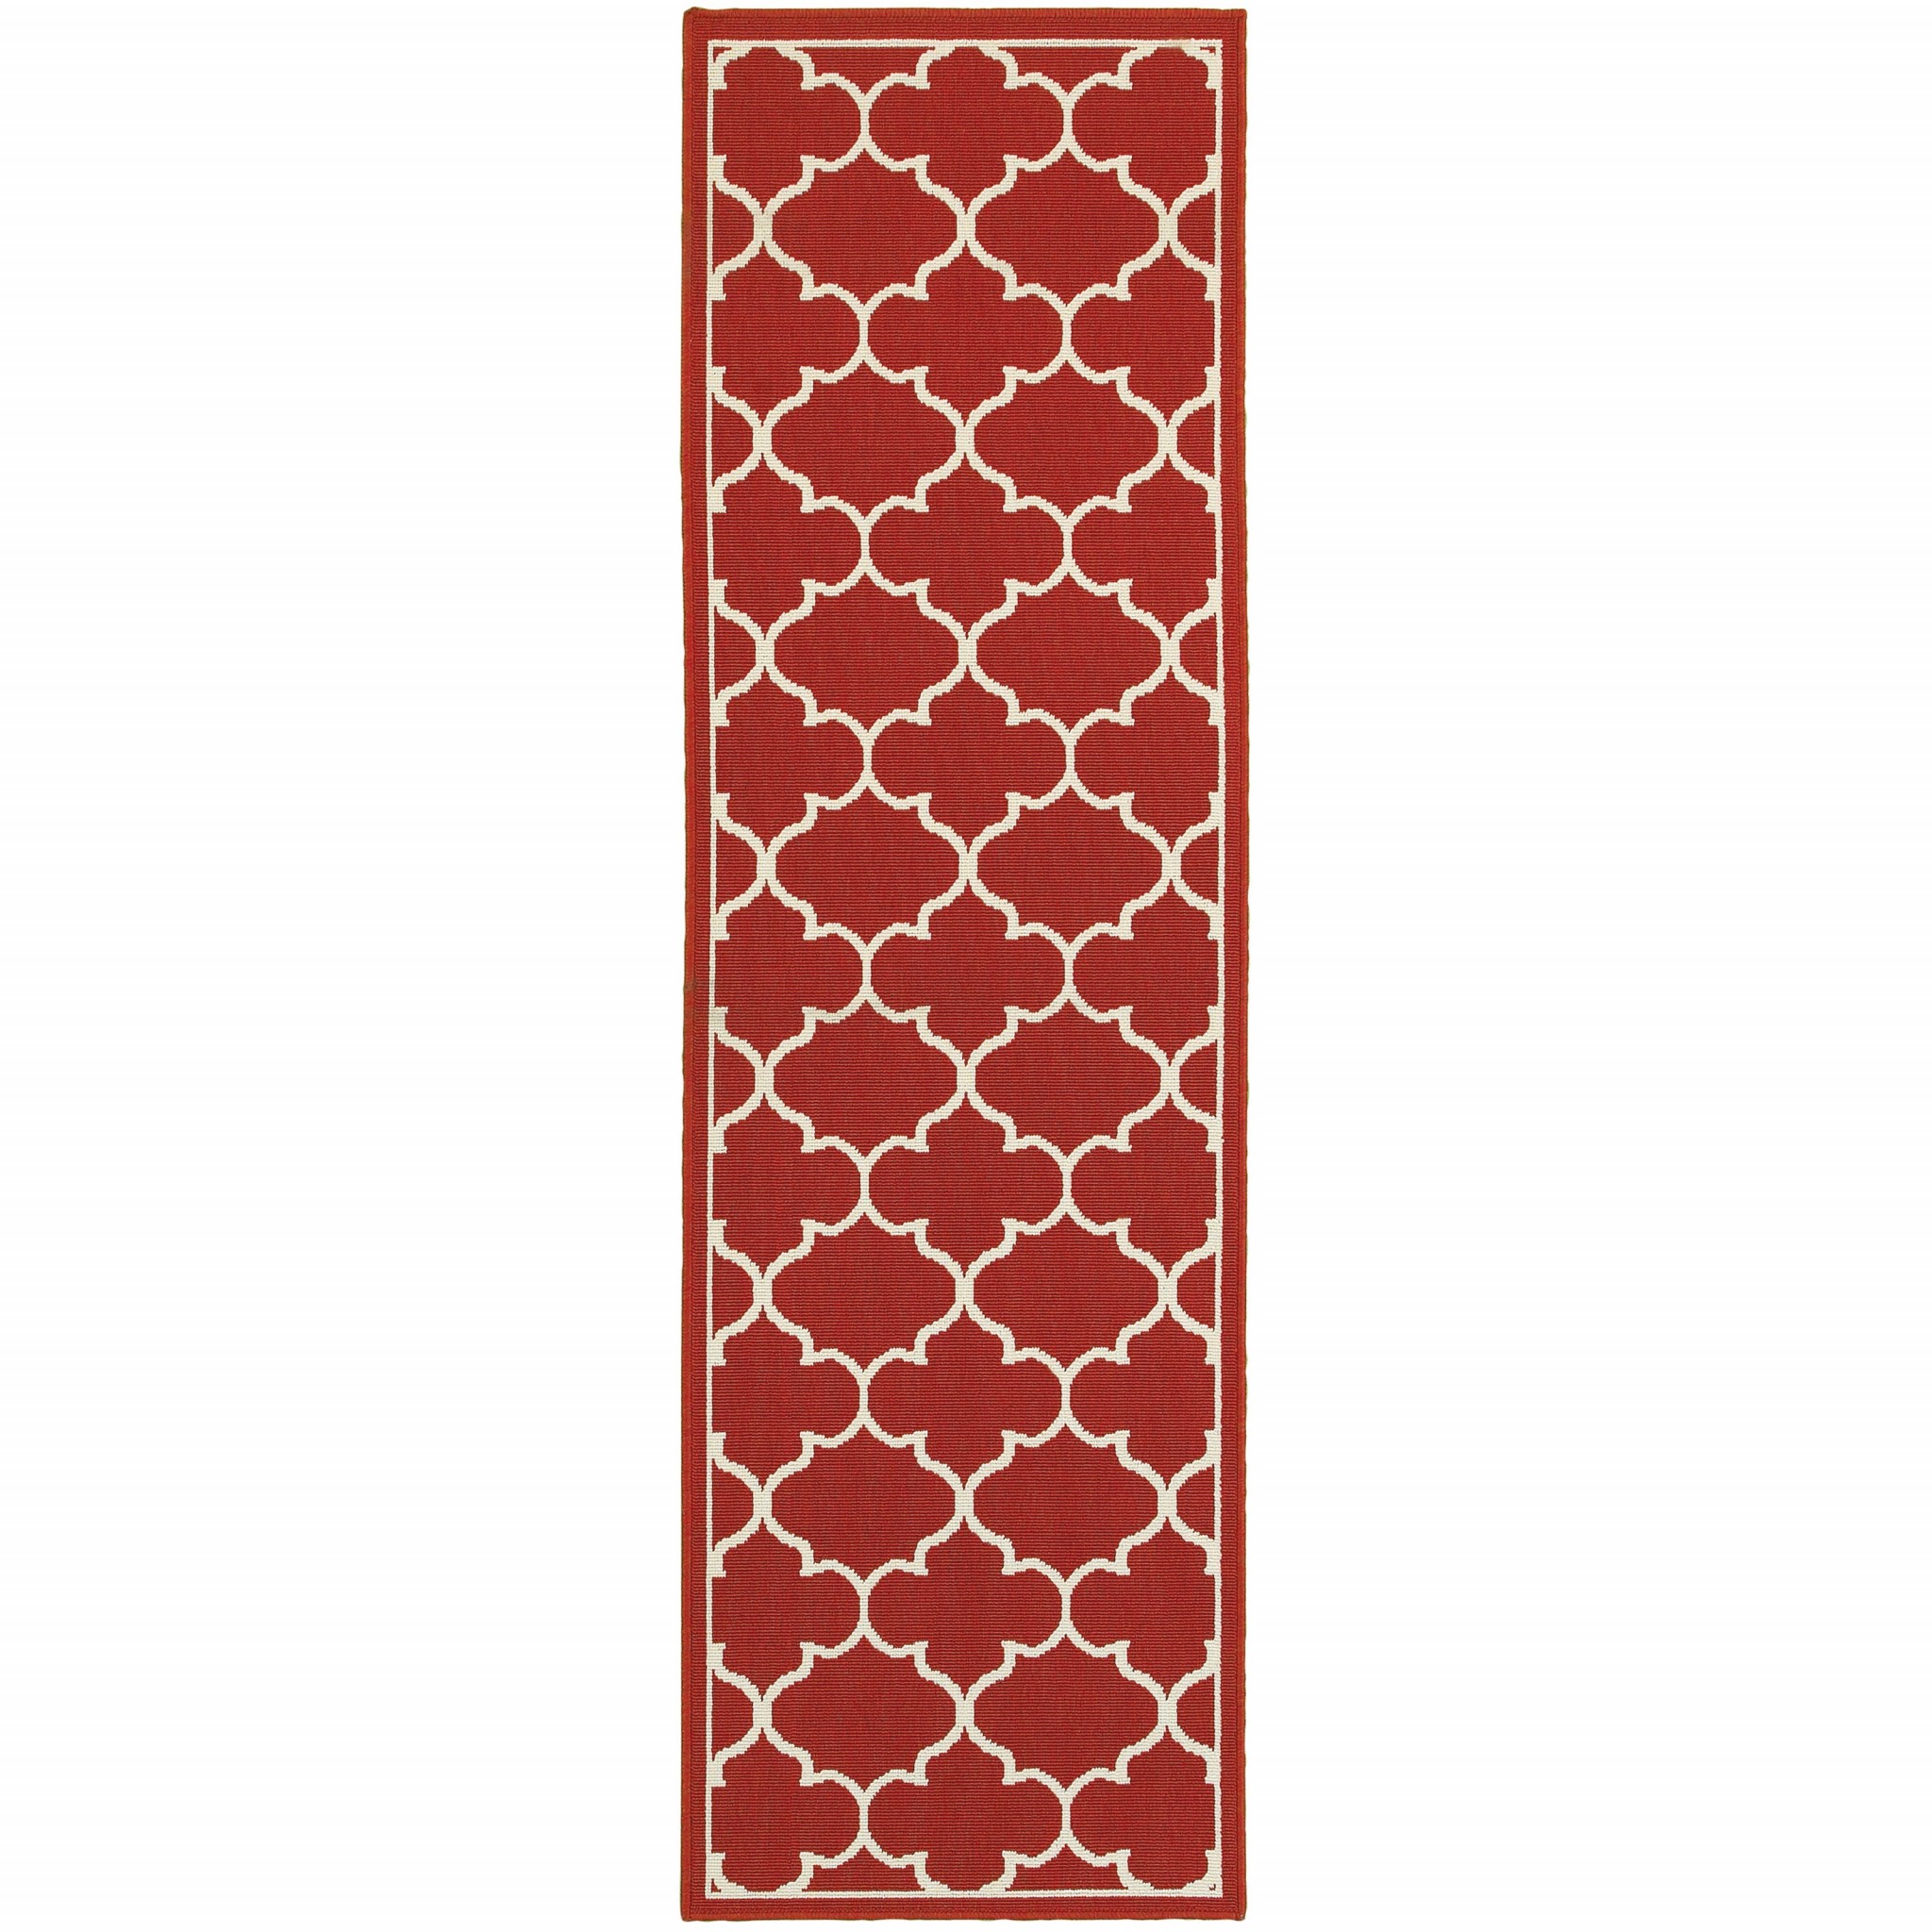 2' X 8' Red and Ivory Indoor Outdoor Area Rug-388659-1